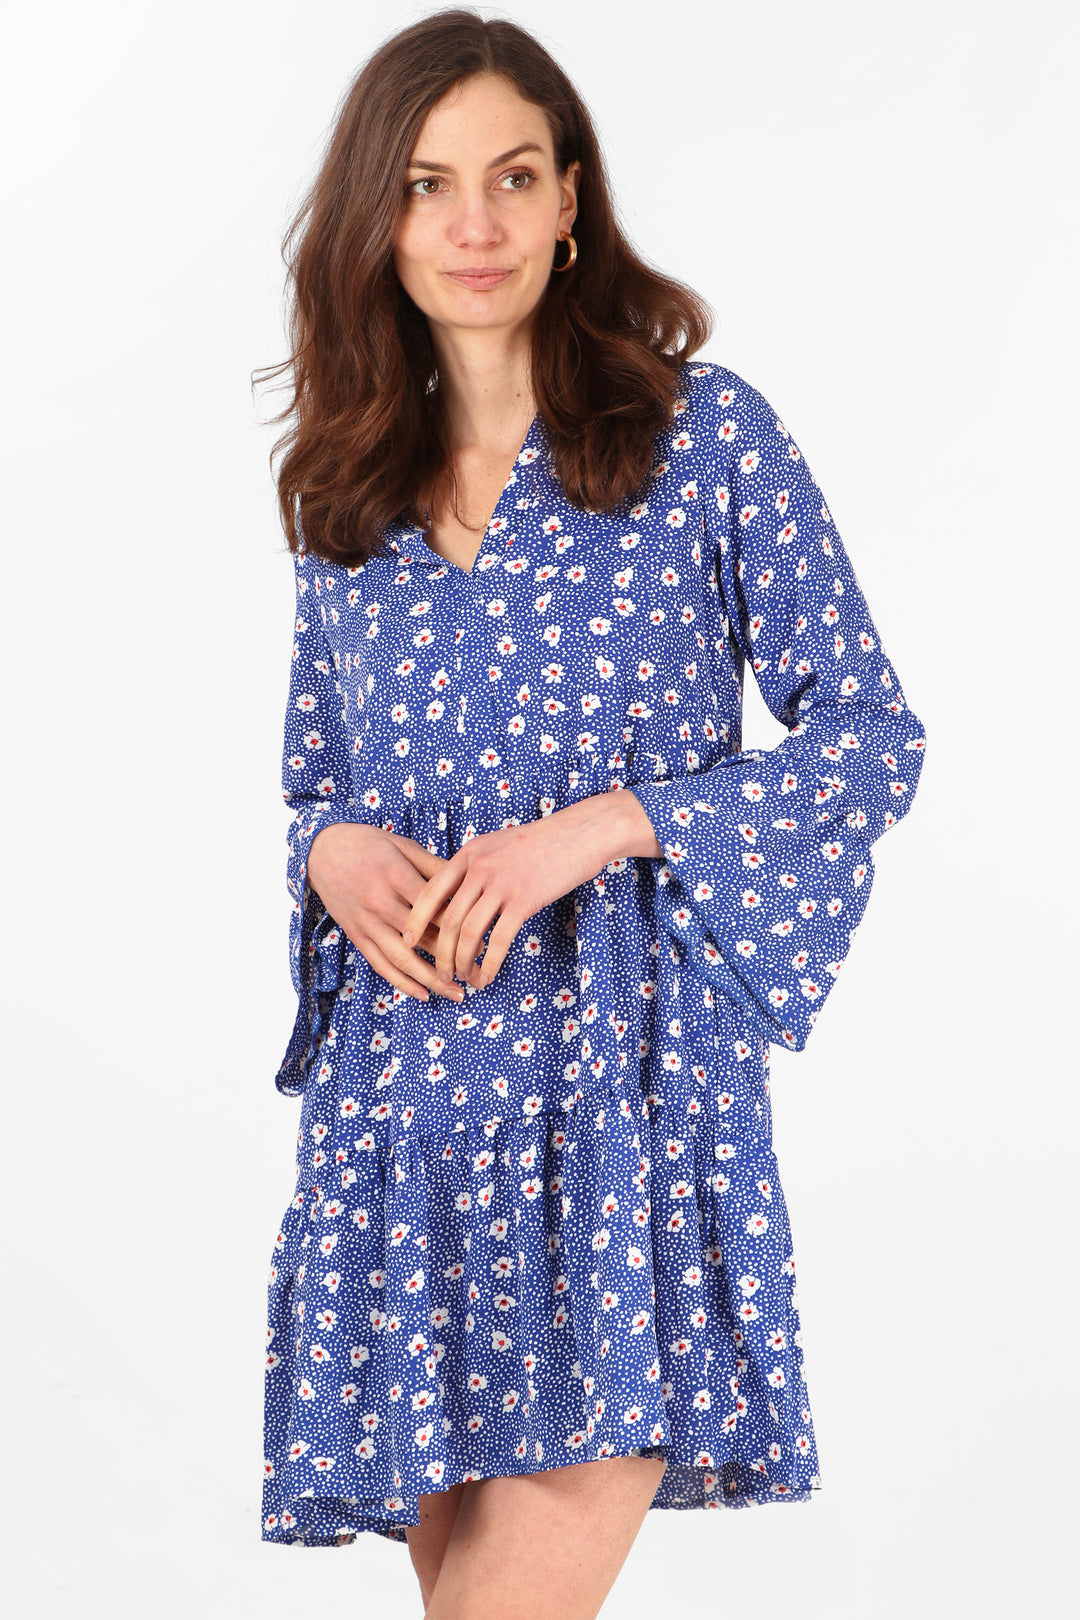 model wearing a blue tiered mini dress with an all over daisy floral and spot print pattern, the dress has v neck and long fluted sleeves